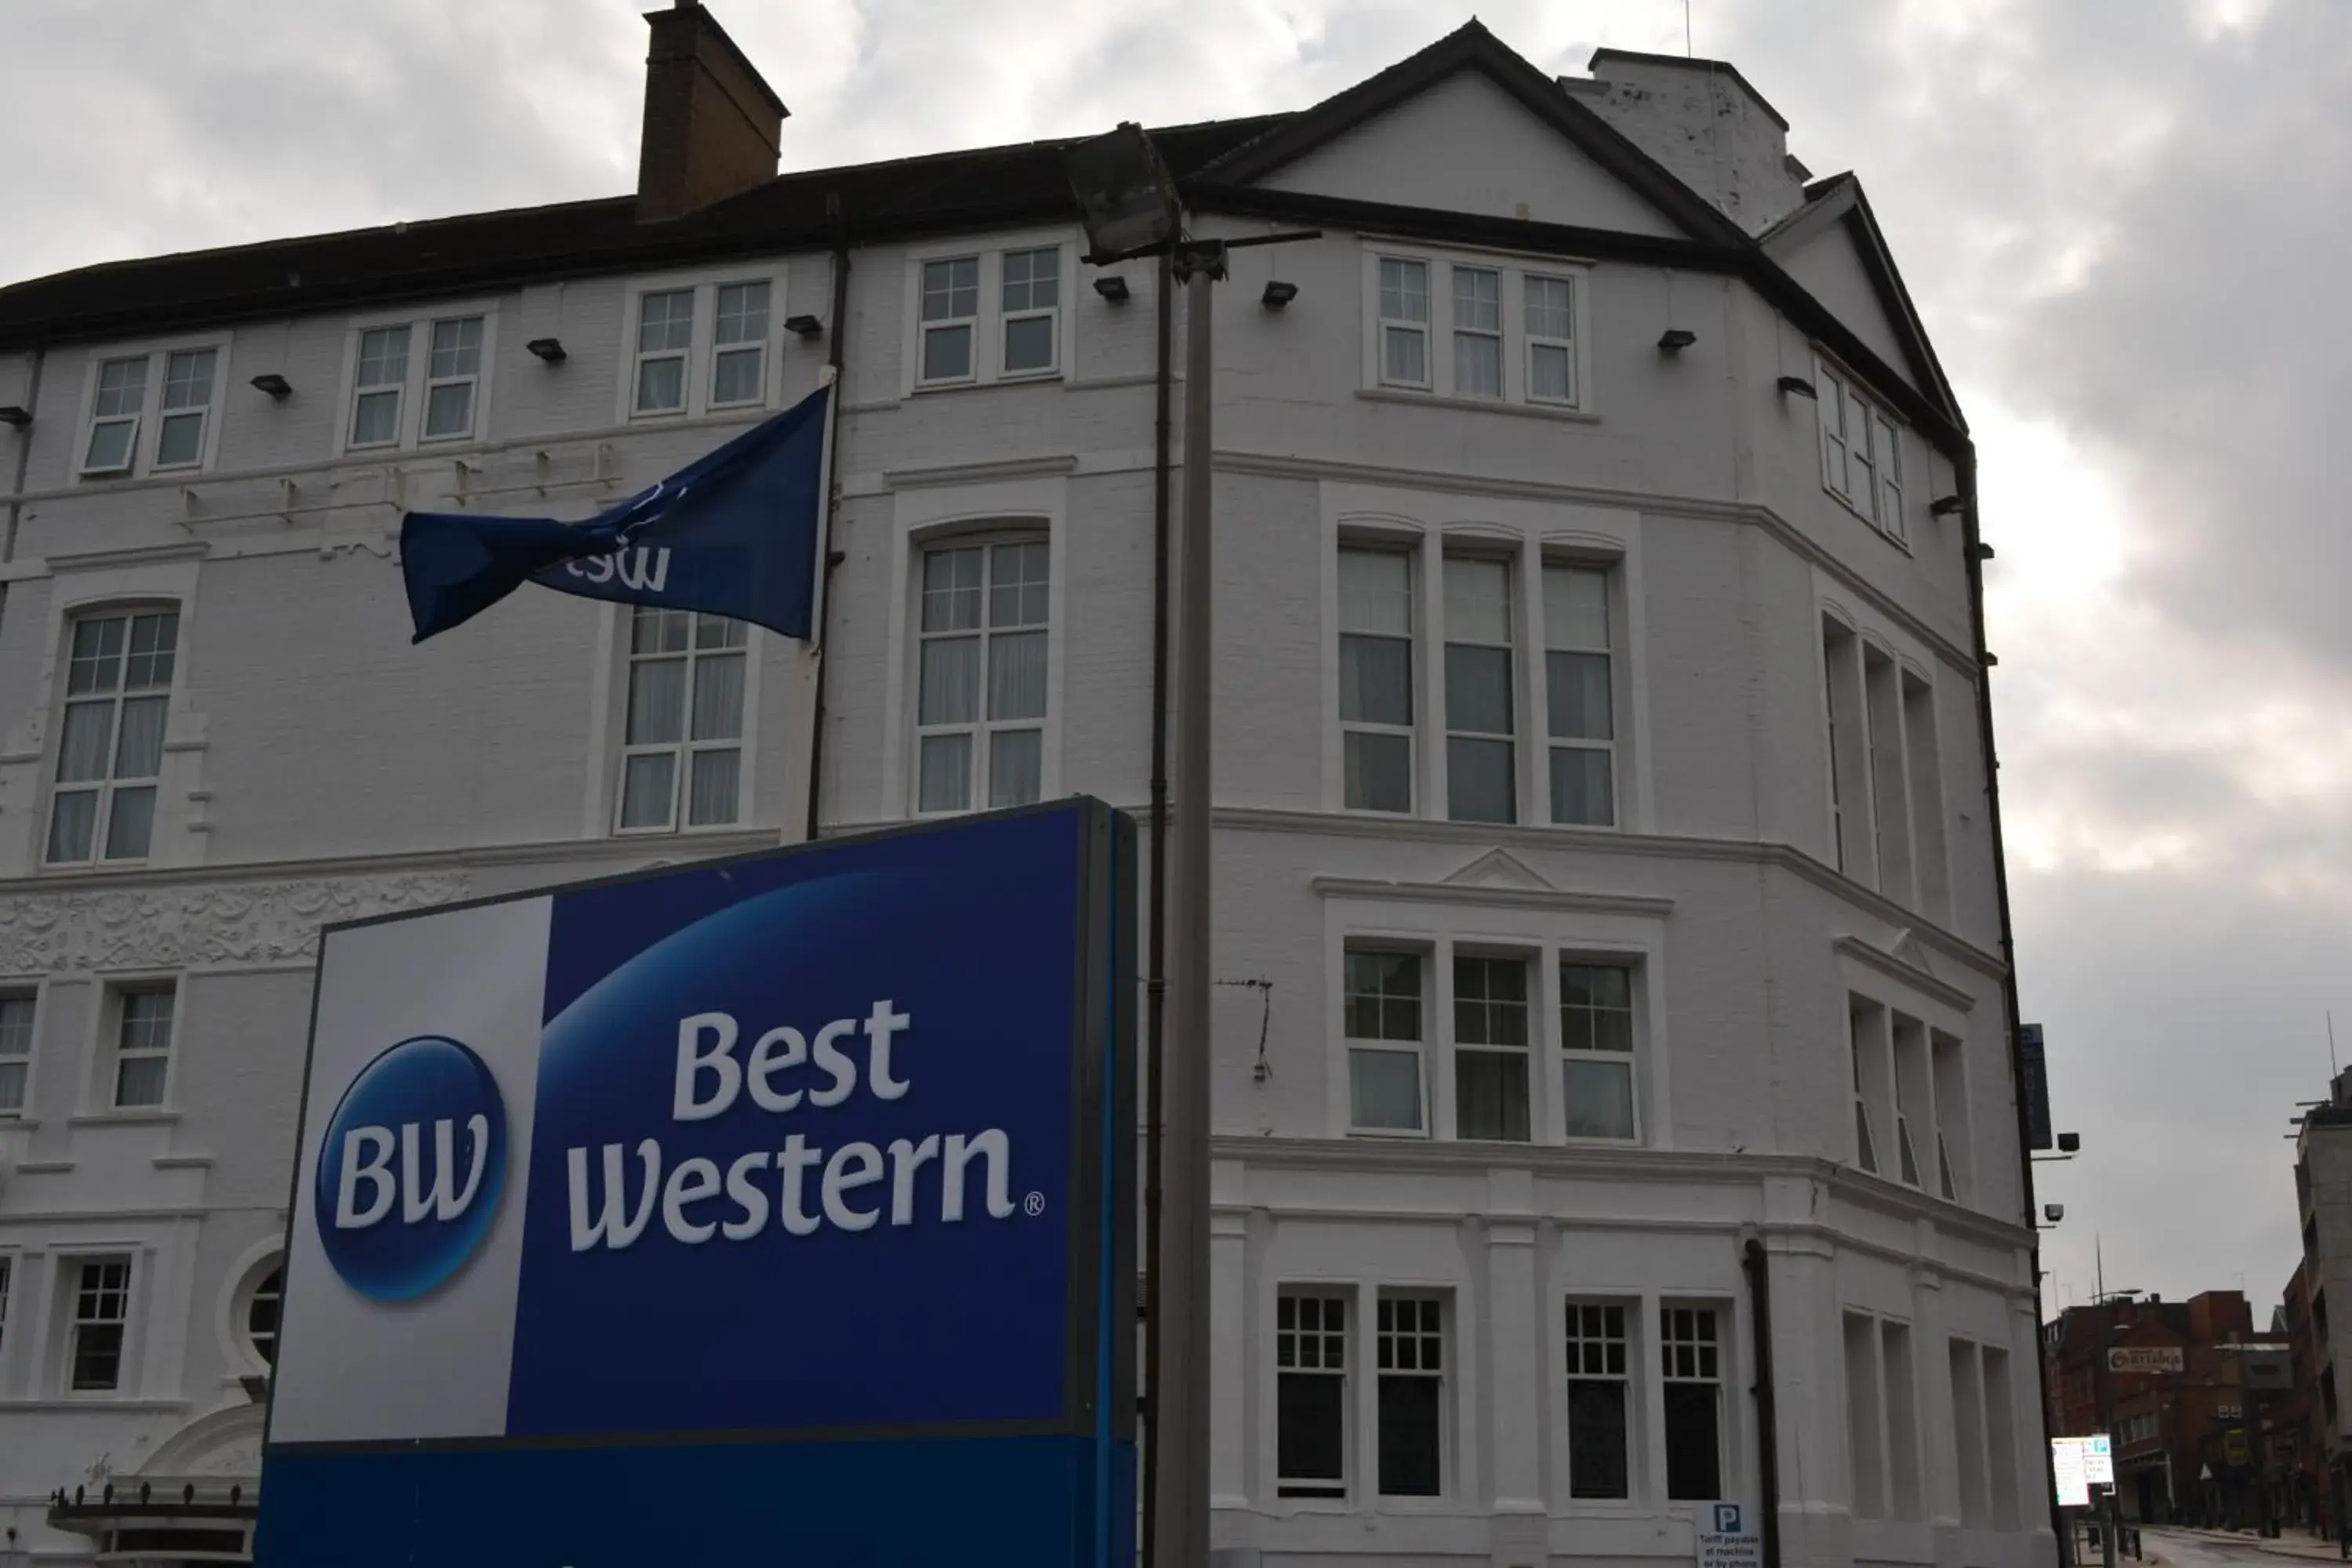 Property Building in Best Western Stoke on Trent City Centre Hotel